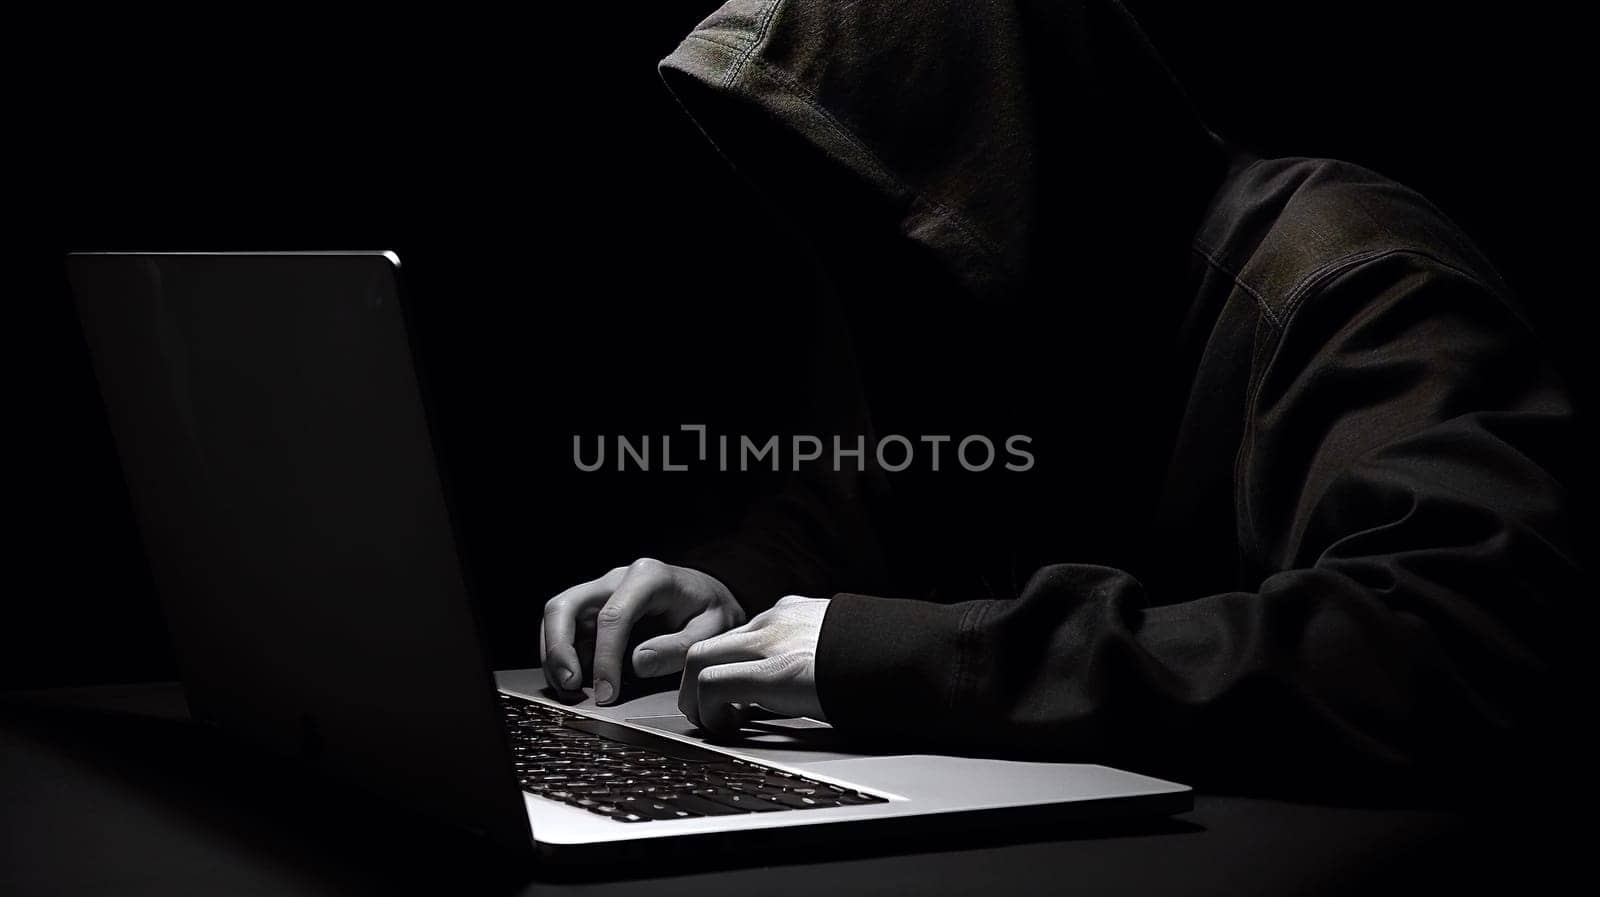 An obscured figure in a hoodie types on a laptop in the dark, evoking themes of cybercrime and online security threats by chrisroll